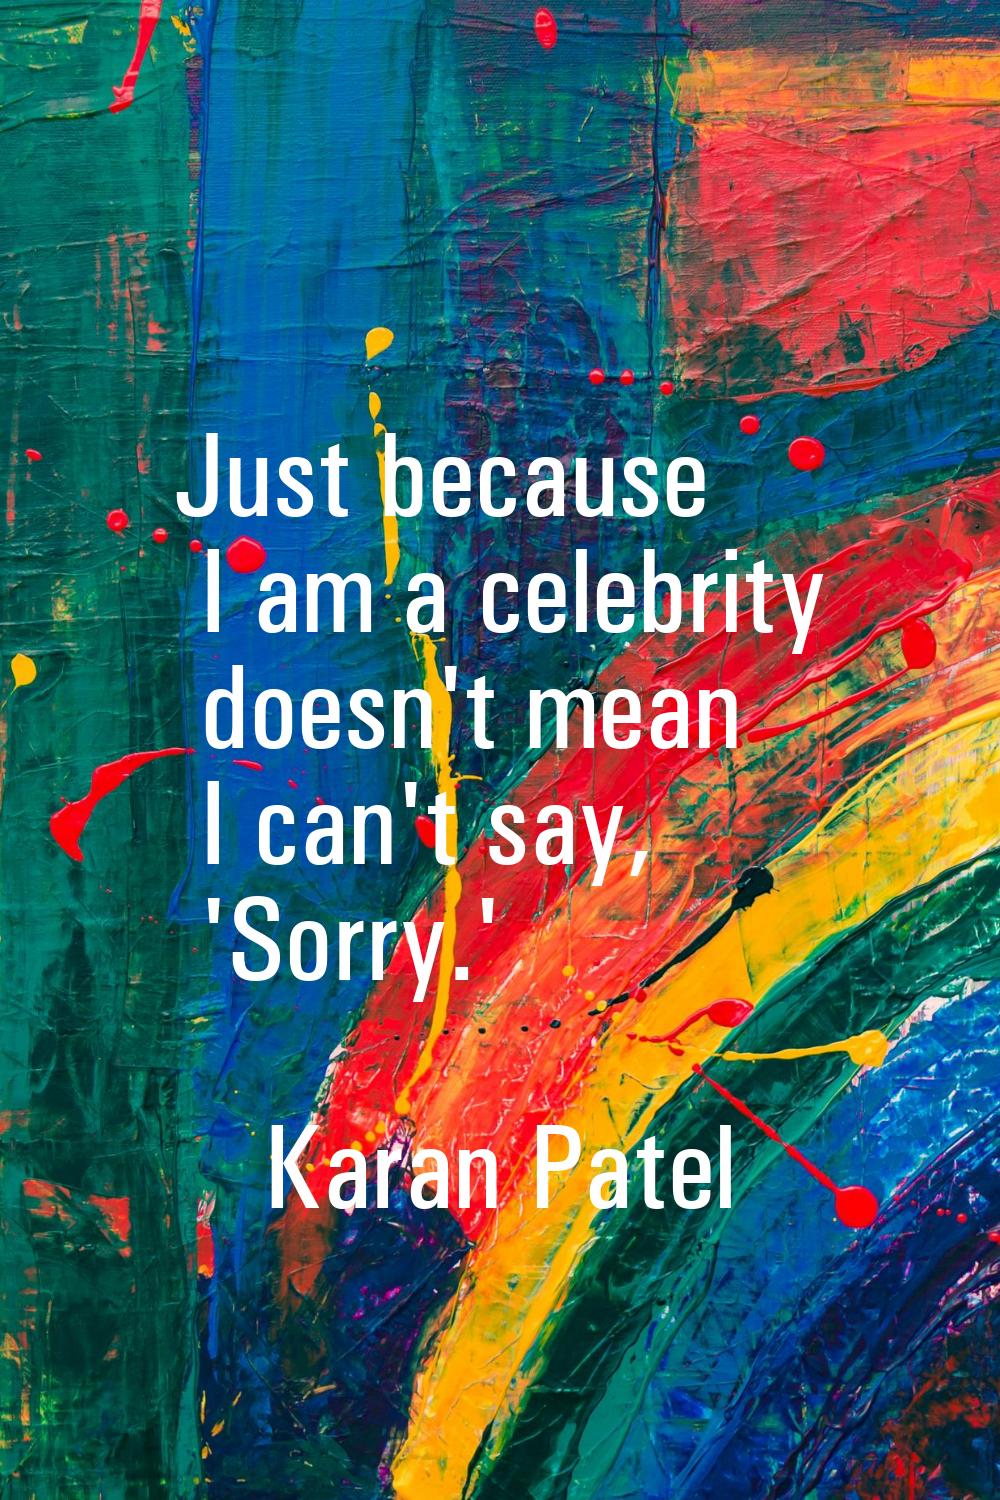 Just because I am a celebrity doesn't mean I can't say, 'Sorry.'